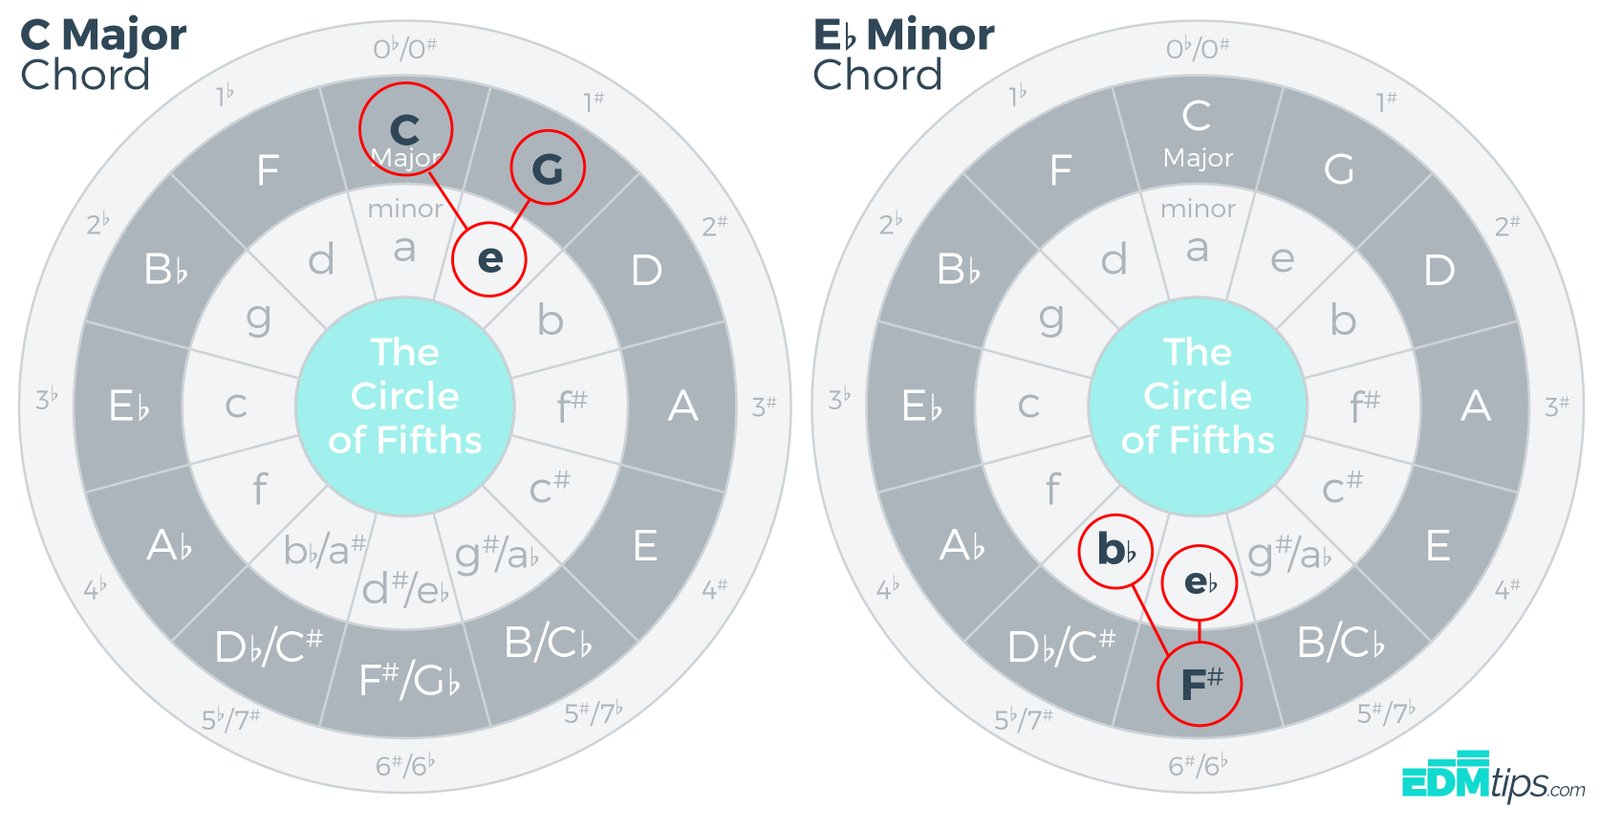 The Circle of Fifths Chords